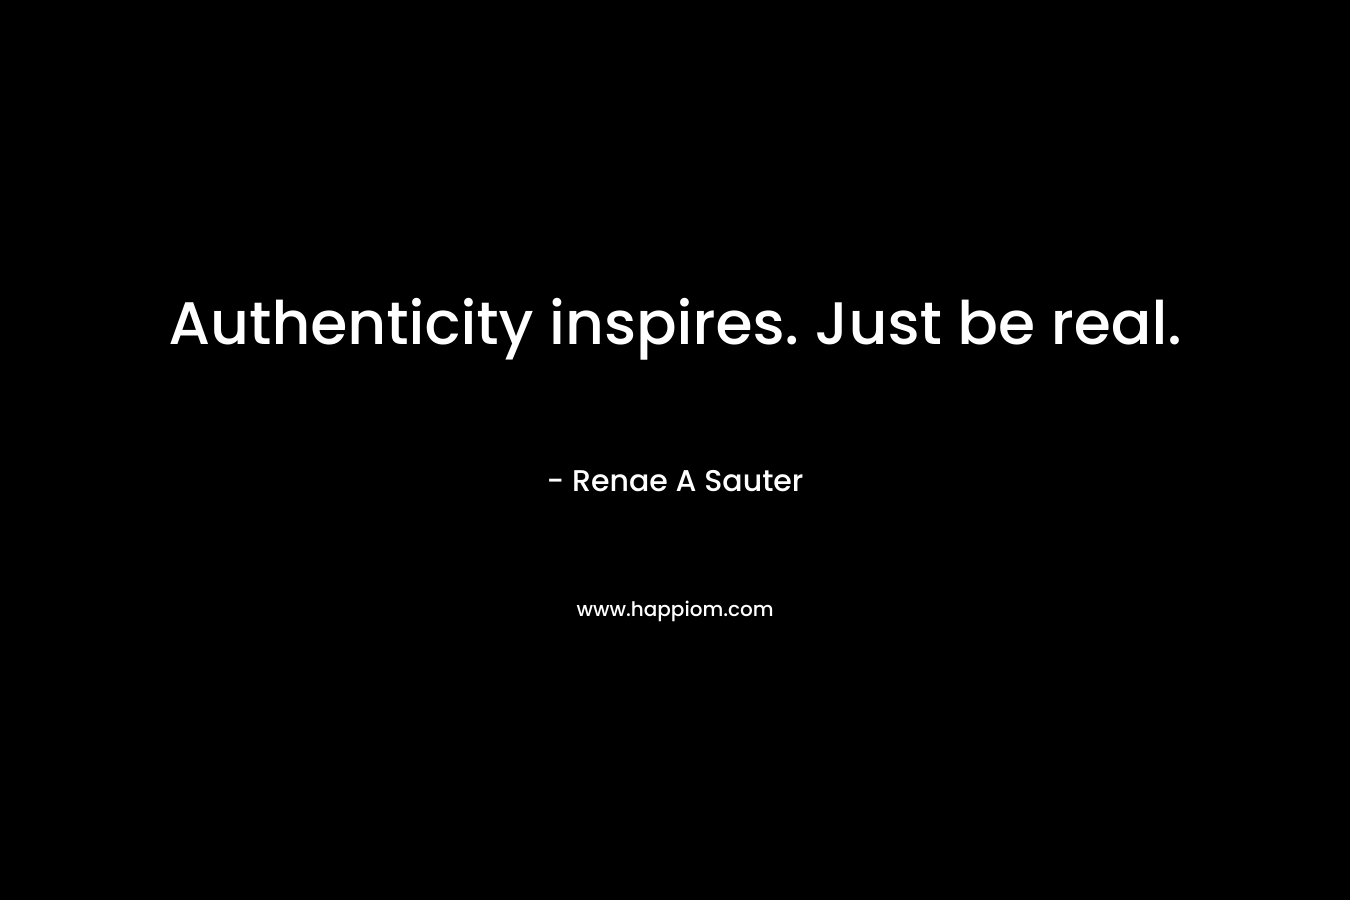 Authenticity inspires. Just be real.